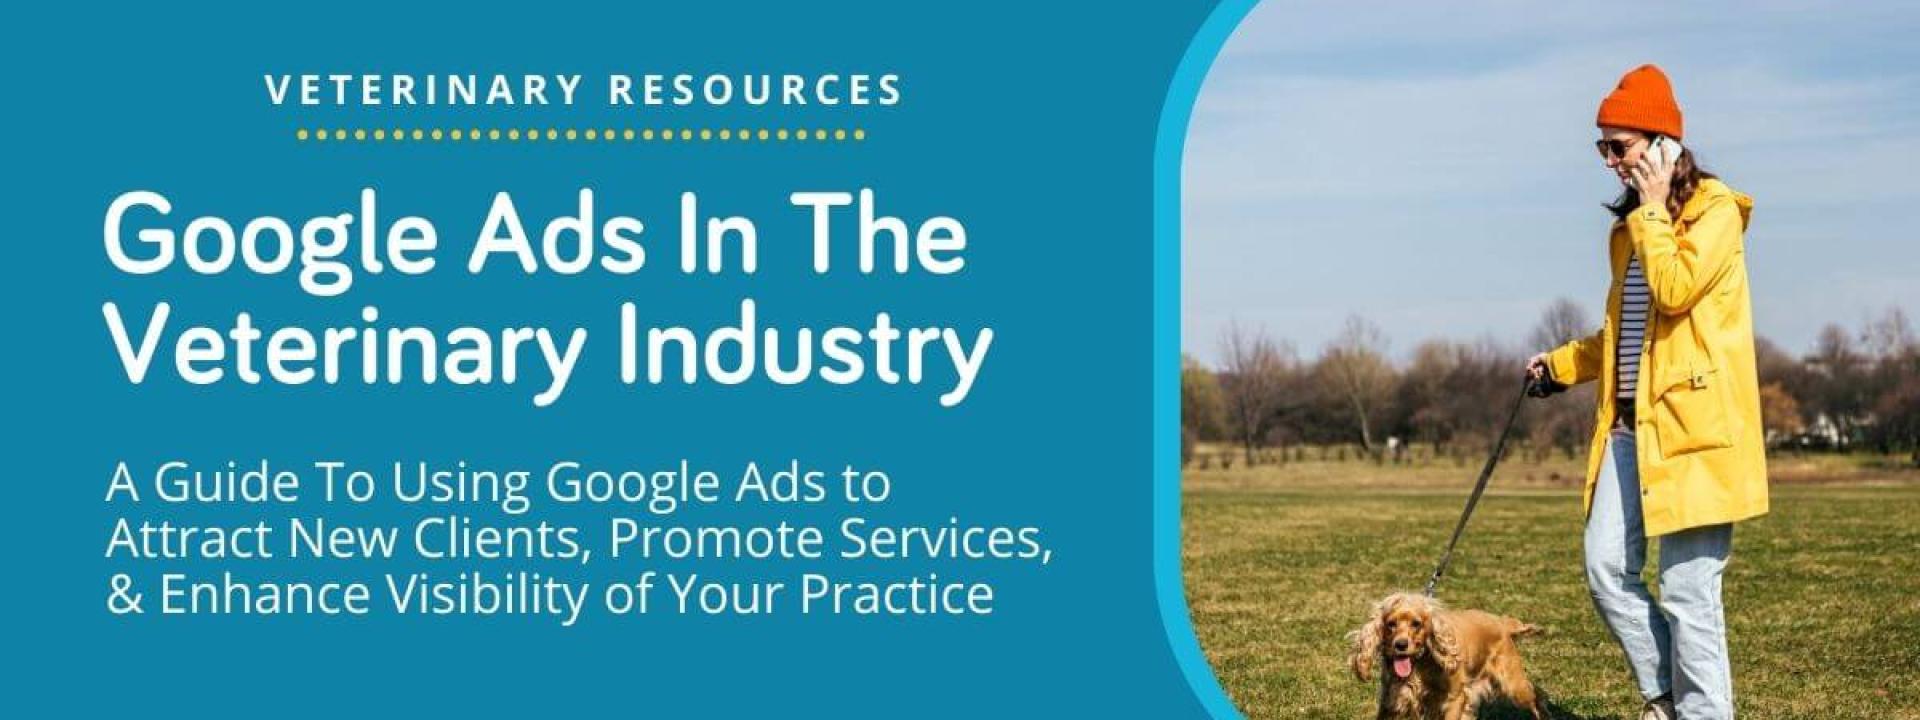 A Guide To Using Google Ads to Attract New Clients, Promote Services, & Enhance Visibility of Your Practice